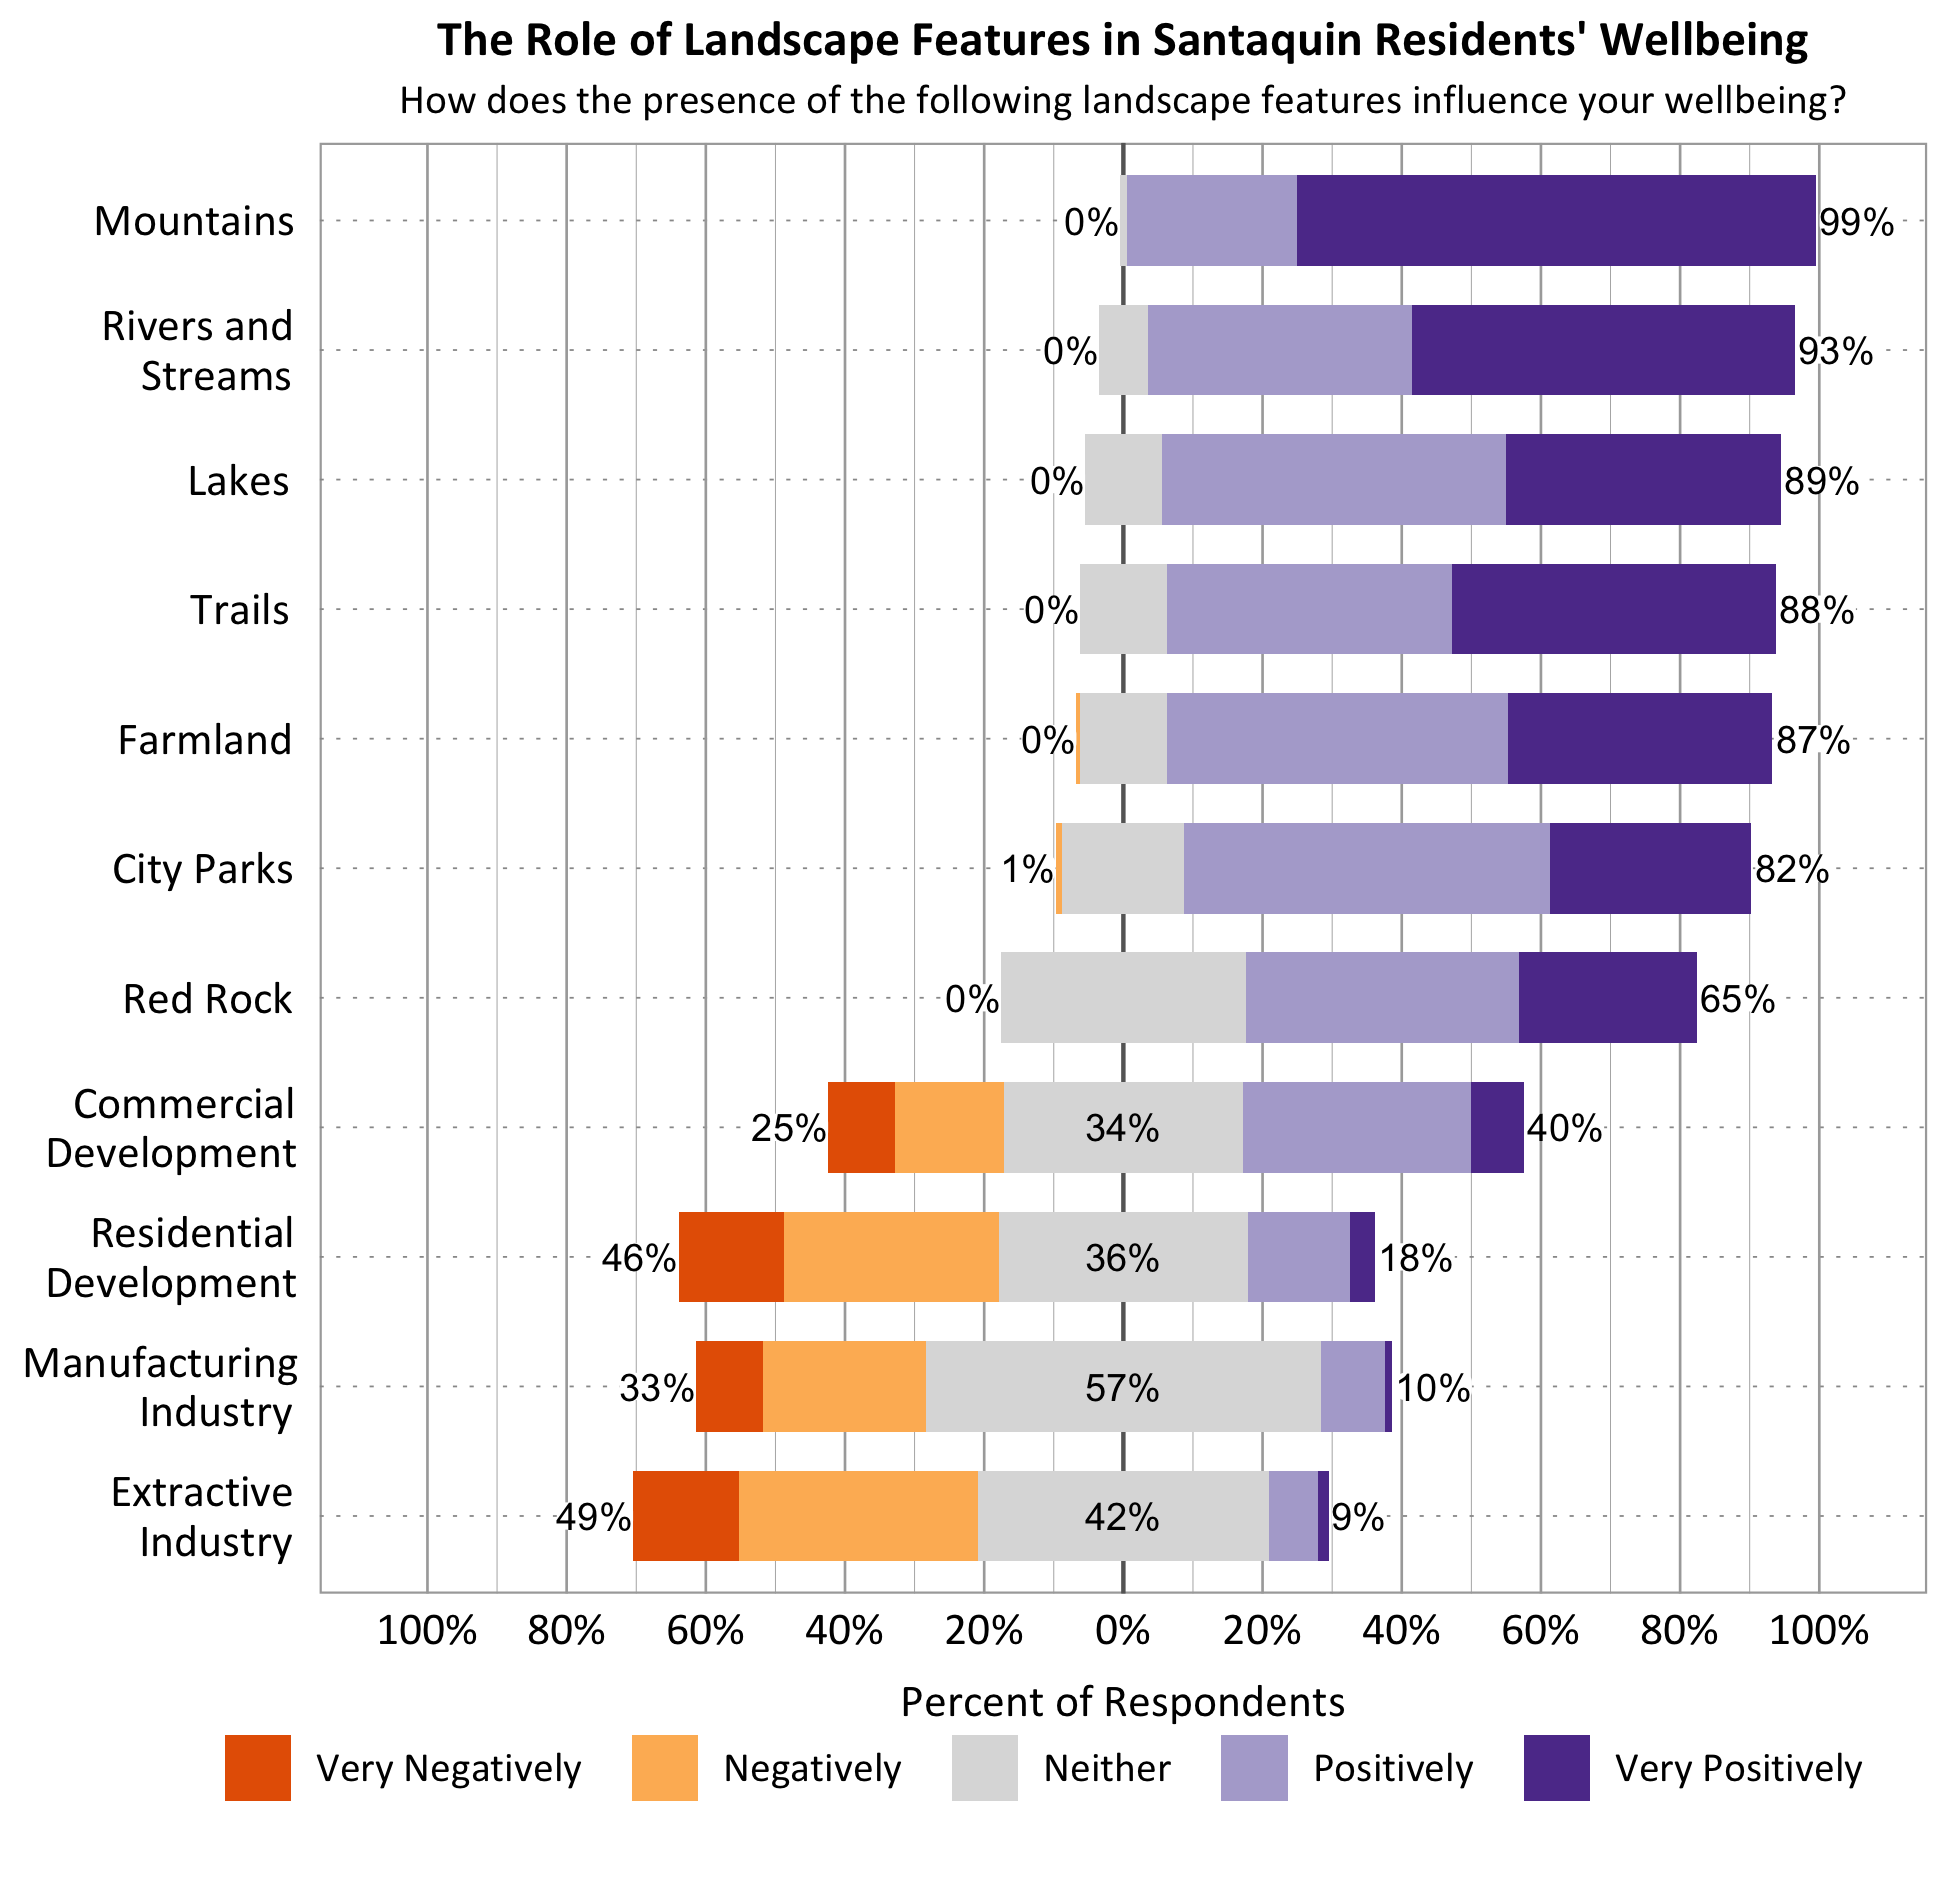 Likert Graph. Title: The Role of Landscape Features in Santaquin Residents' Wellbeing. Subtitle: How does the presence of the following landscape features influence your wellbeing? Feature: Mountains - 0% of respondents indicated very negatively or negatively, 1% indicated neither, 99% indicated positively or very positively; Feature: Rivers and Streams - 0% of respondents indicated very negatively or negatively, 7% indicated neither, 93% indicated positively or very positively; Feature: Lakes - 0% of respondents indicated very negatively or negatively, 11% indicated neither, 89% indicated positively or very positively; Feature: Trails - 0% of respondents indicated very negatively or negatively, 12% indicated neither, 88% indicated positively or very positively; Feature: City Parks - 1% of respondents indicated very negatively or negatively, 17% indicated neither, 82% indicated positively or very positively; Feature: Red Rock - 0% of respondents indicated very negatively or negatively, 35% indicated neither, 65% indicated positively or very positively; Feature: Farmland – 0% of respondents indicated very negatively or negatively, 13% indicated neither, 87% indicated positively or very positively; Commercial Development - 25% of respondents indicated very negatively or negatively, 34% indicated neither, 40% indicated positively or very positively; Feature: Residential Development – 46% of respondents indicated very negatively or negatively, 36% indicated neither, 18% indicated positively or very positively; Feature: Feature: Manufacturing Industry - 33% of respondents indicated very negatively or negatively, 57% indicated neither, 10% indicated positively or very positively; Feature: Extractive Industry - 49% of respondents indicated very negatively or negatively, 42% indicated neither, 9% indicated positively or very positively.